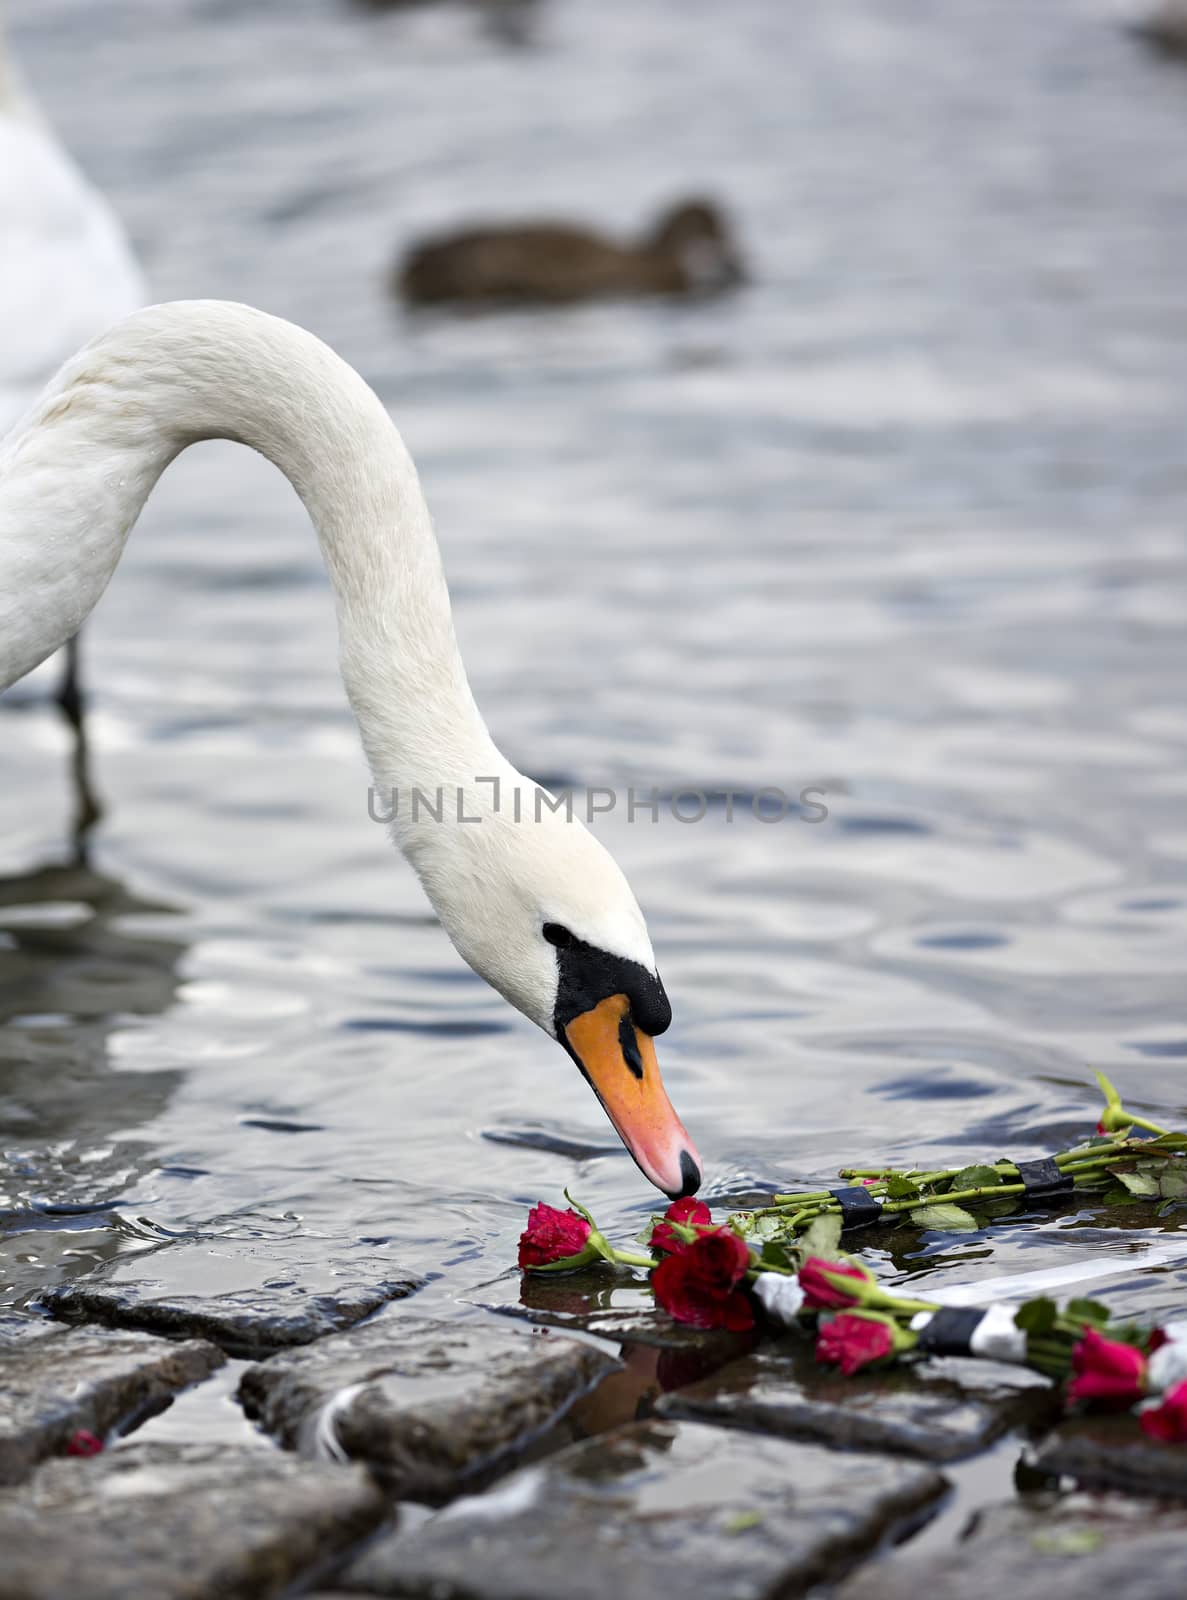 Roses and the Swan by jetstream4wd